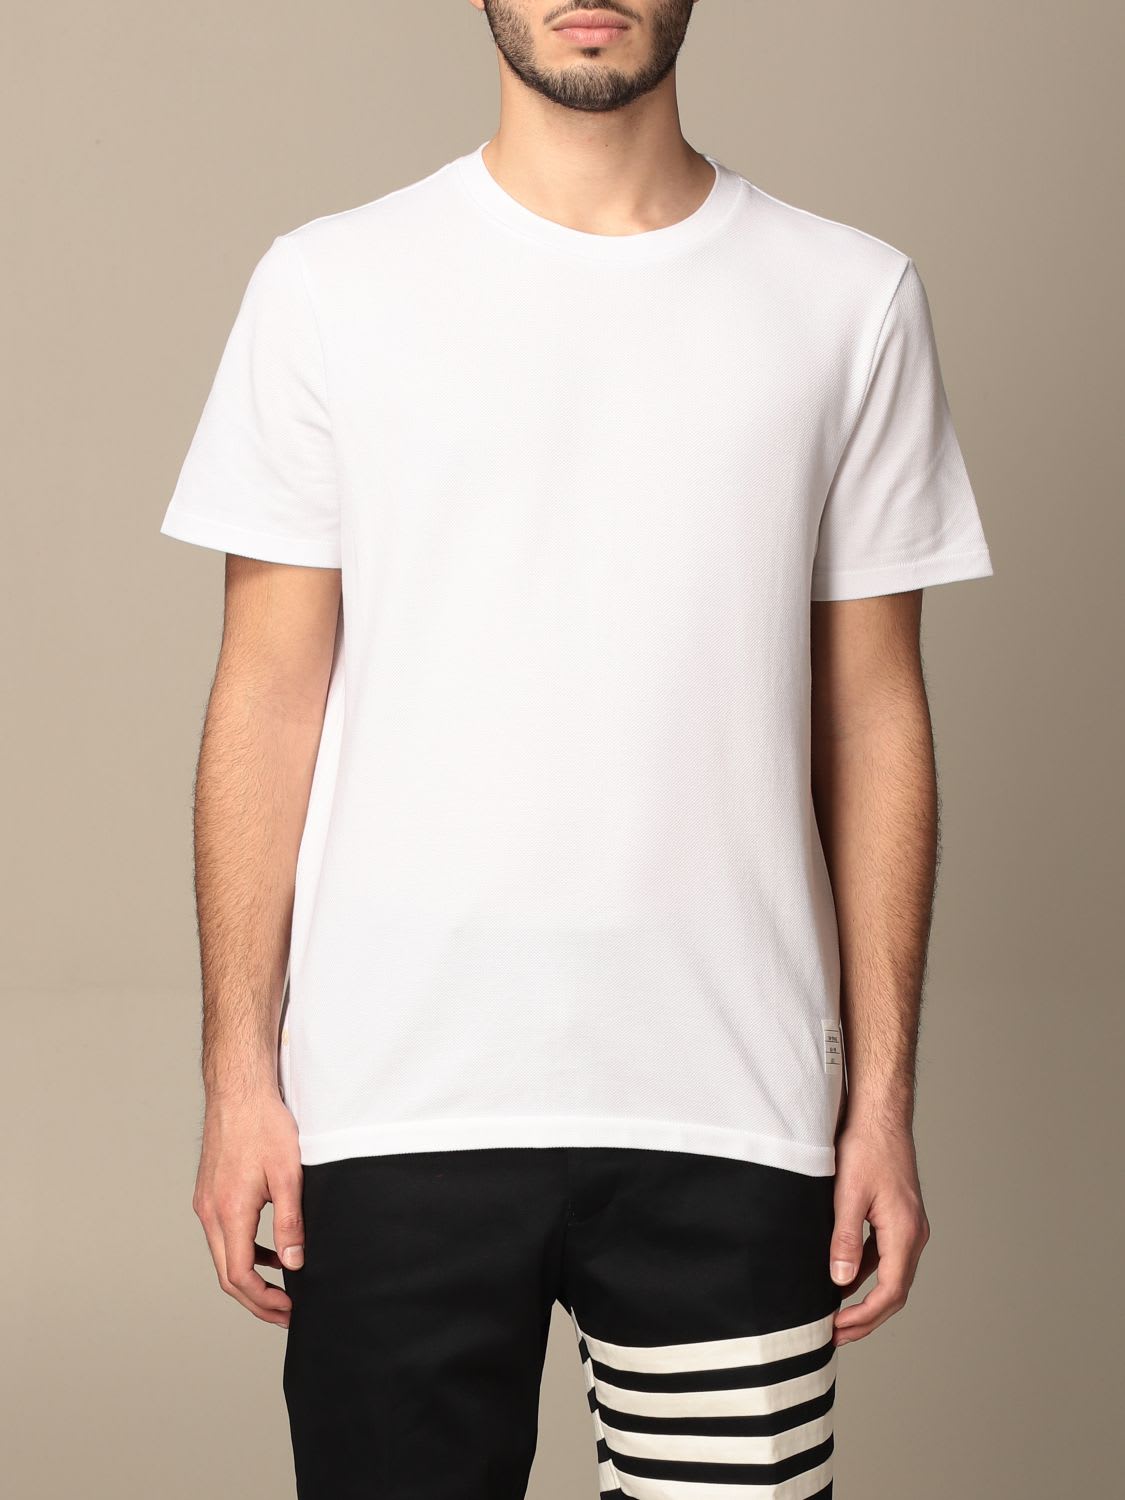 THOM BROWNE T-SHIRT THOM BROWNE COTTON T-SHIRT WITH STRIPED DETAIL,MJS056A 00050 100